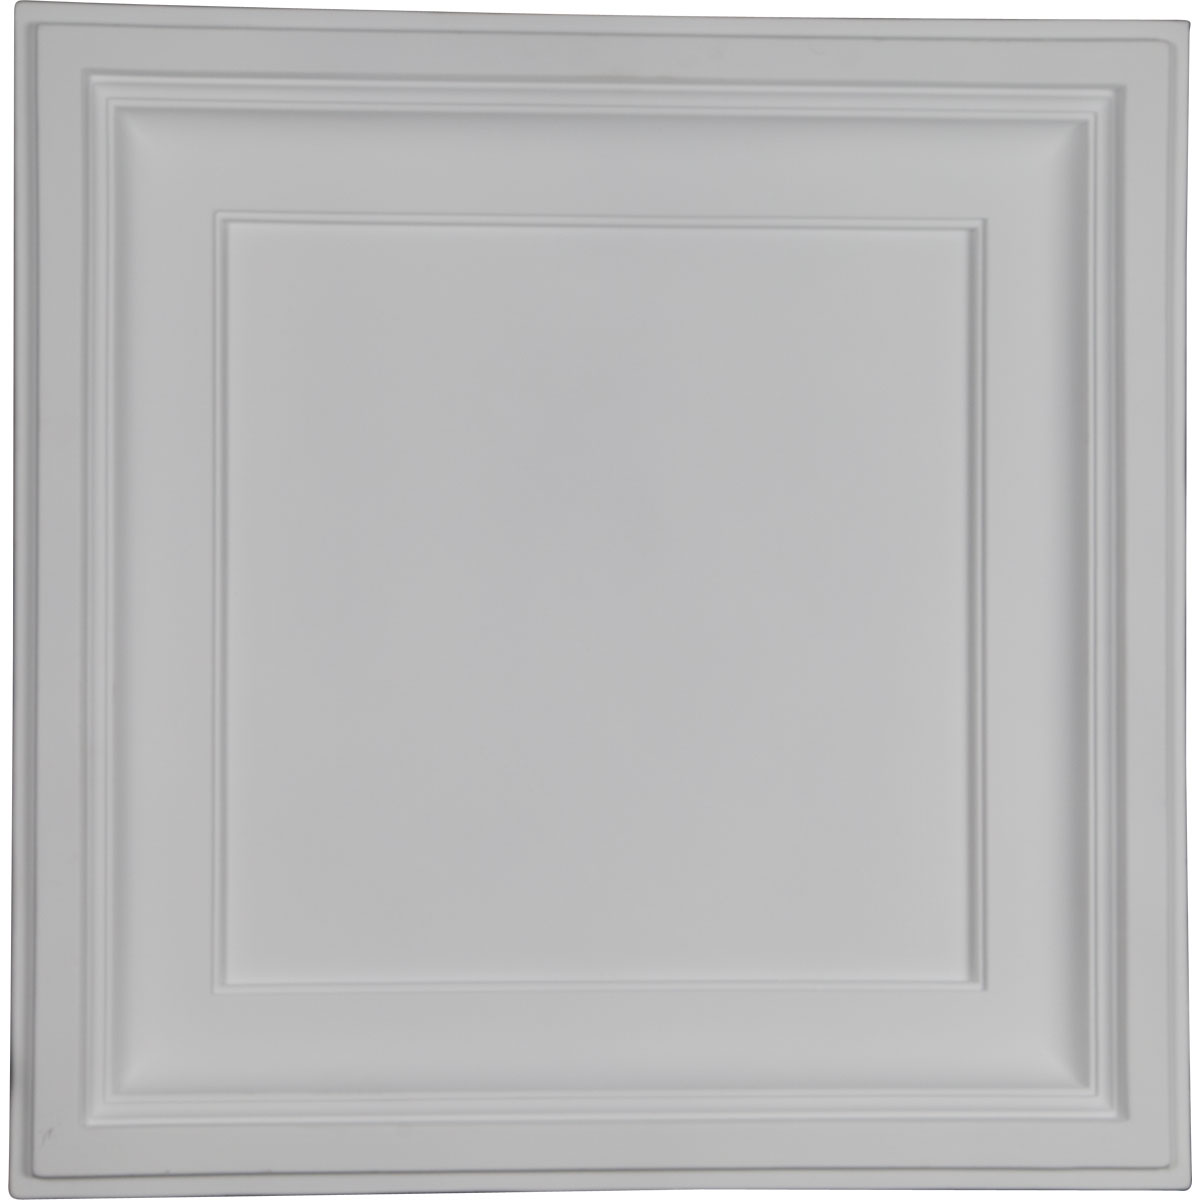 23.87 X 23.87 X 2.5 In. Traditional Ceiling Tile